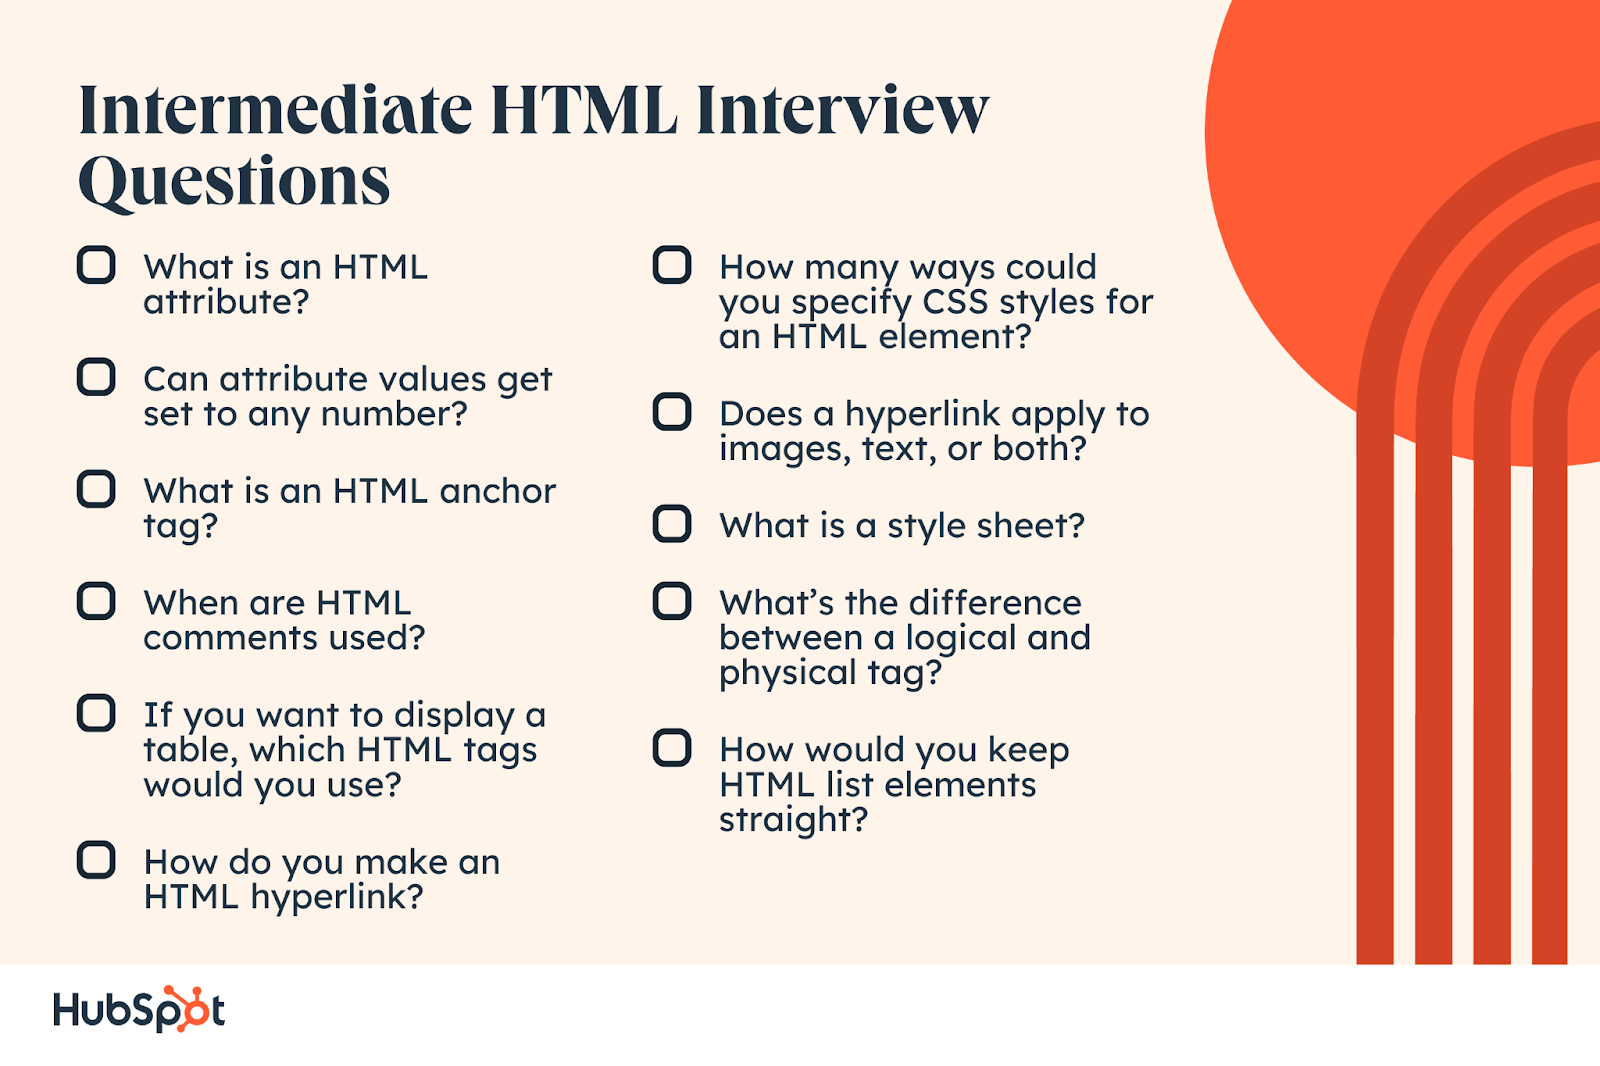 Intermediate HTML Interview Questions. What is an HTML attribute? Can attribute values get set to any number? What is an HTML anchor tag? When are HTML comments used? If you want to display a table, which HTML tags would you use? How do you make an HTML hyperlink? How many ways could you specify CSS styles for an HTML element? Does a hyperlink apply to images, text, or both? What is a style sheet? What’s the difference between a logical and physical tag? How would you keep HTML list elements straight?